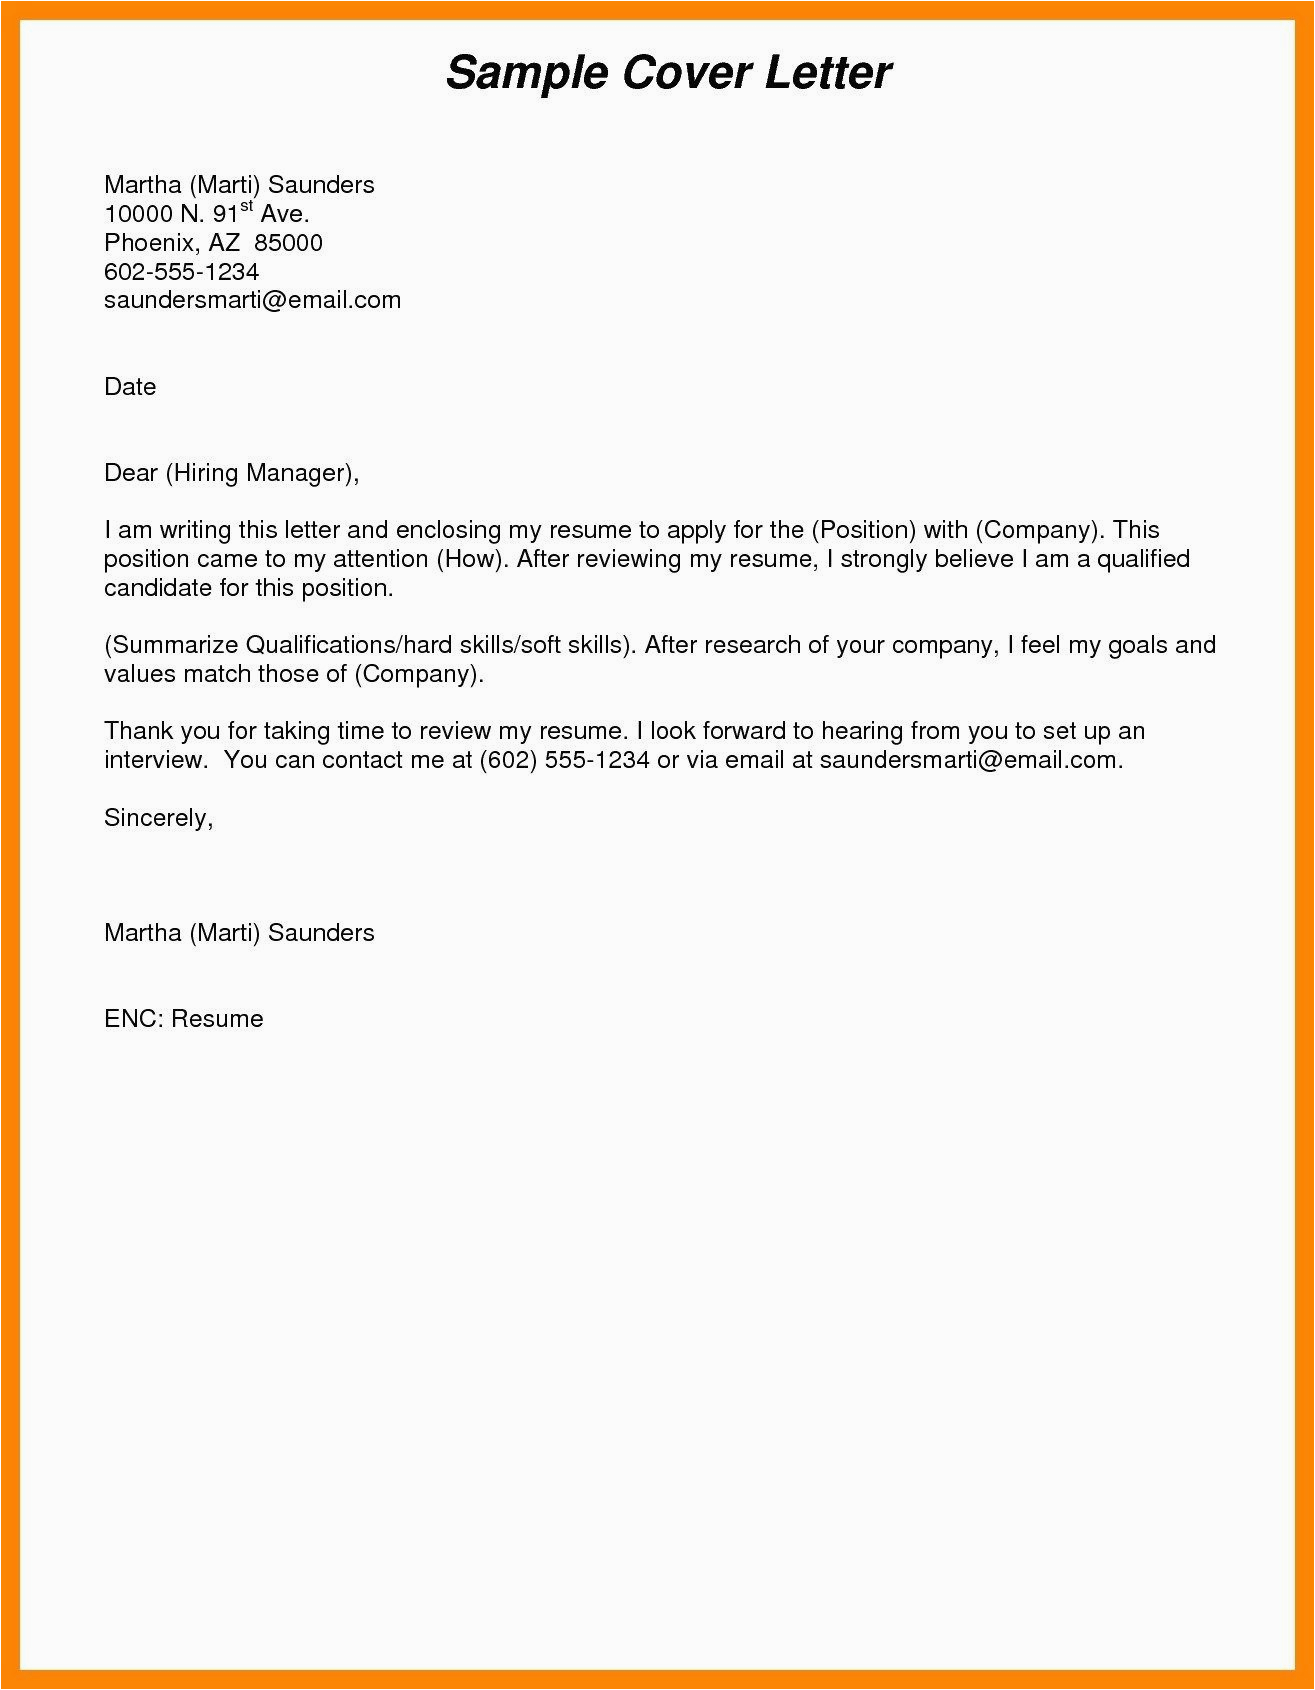 Sample Email Cover Letter Examples for Resume 25 Email Cover Letter Sample